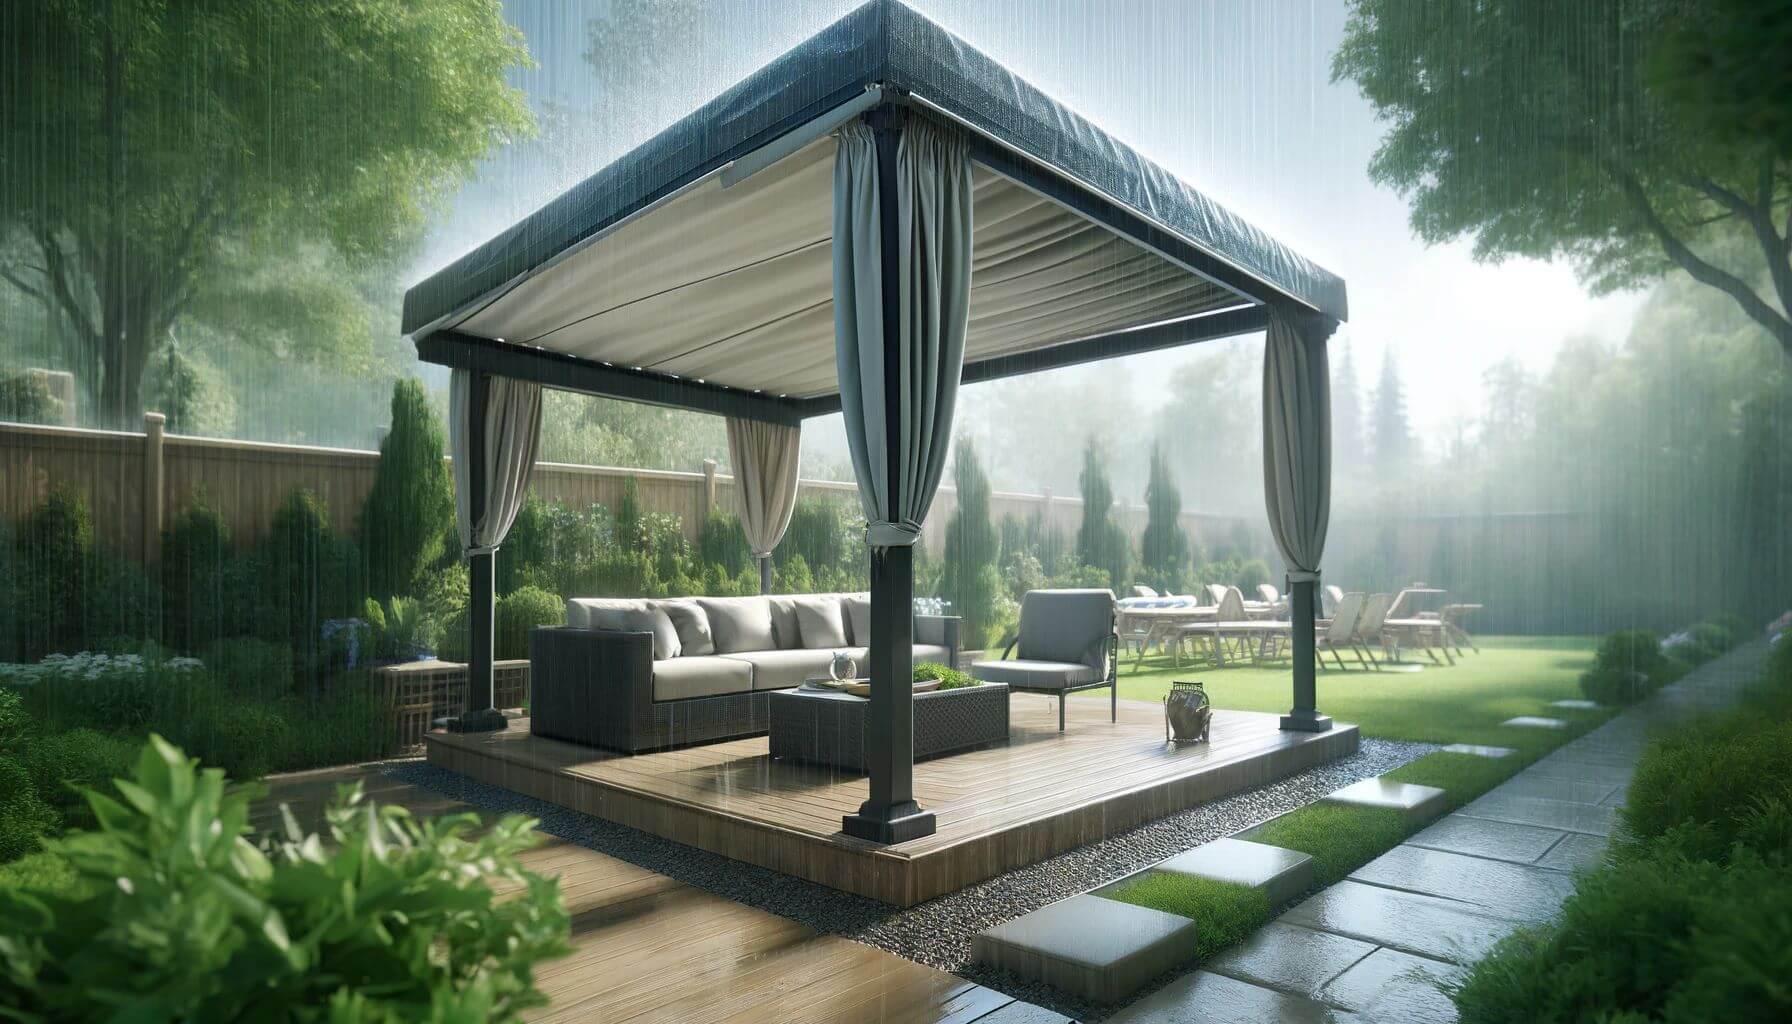 Shield with Waterproof Pergola Covers